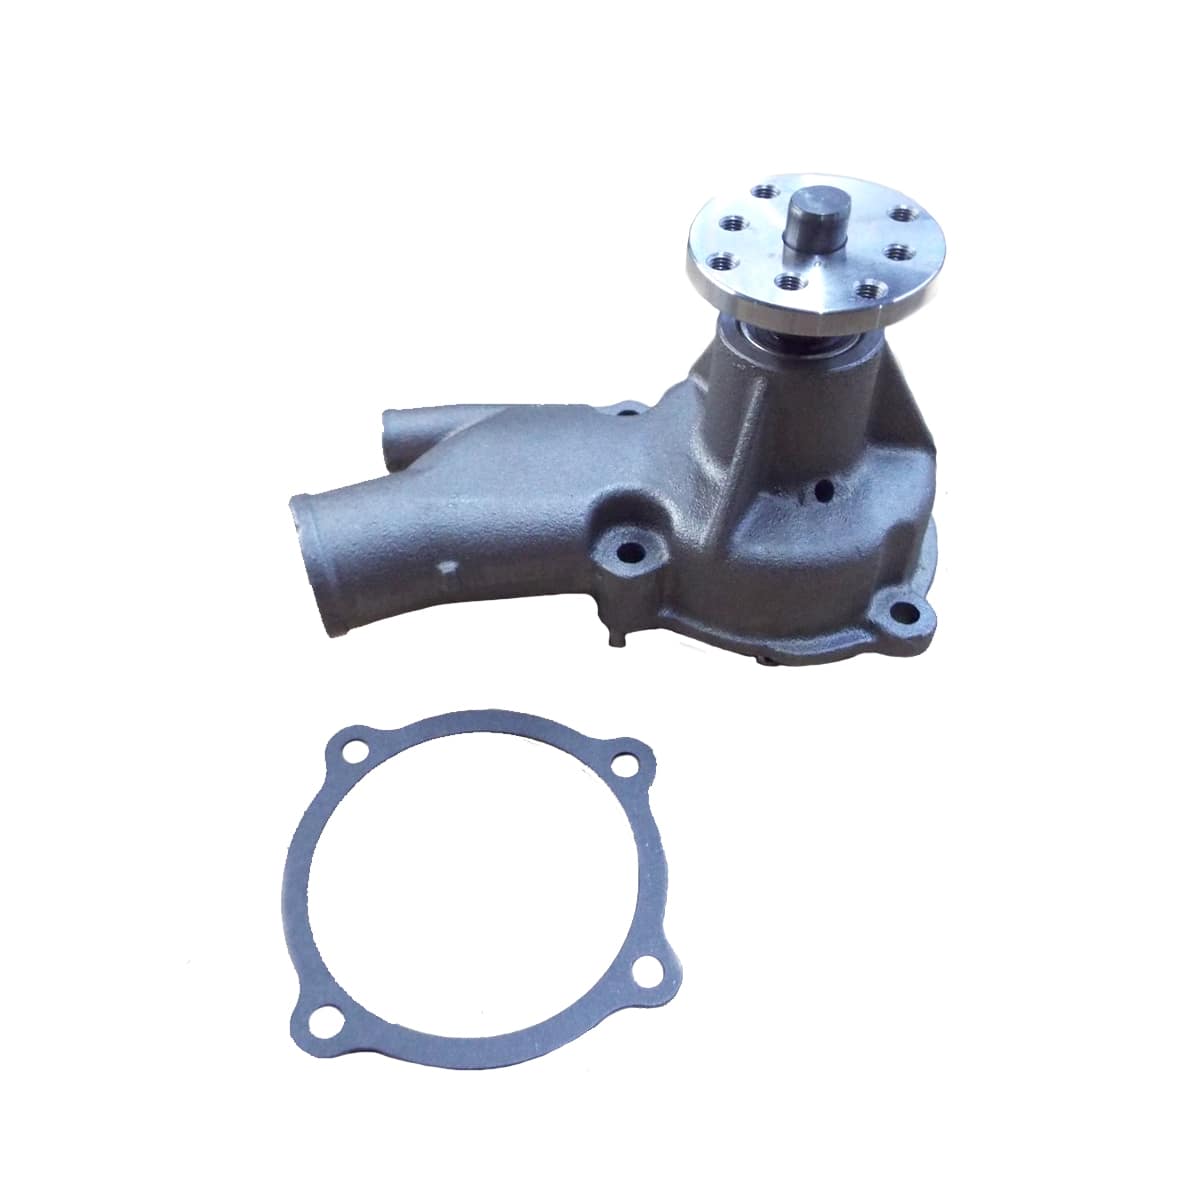 1963-1972 Water Pump for Six Cylinder 292 Engines Chevrolet and GMC Pickup Truck